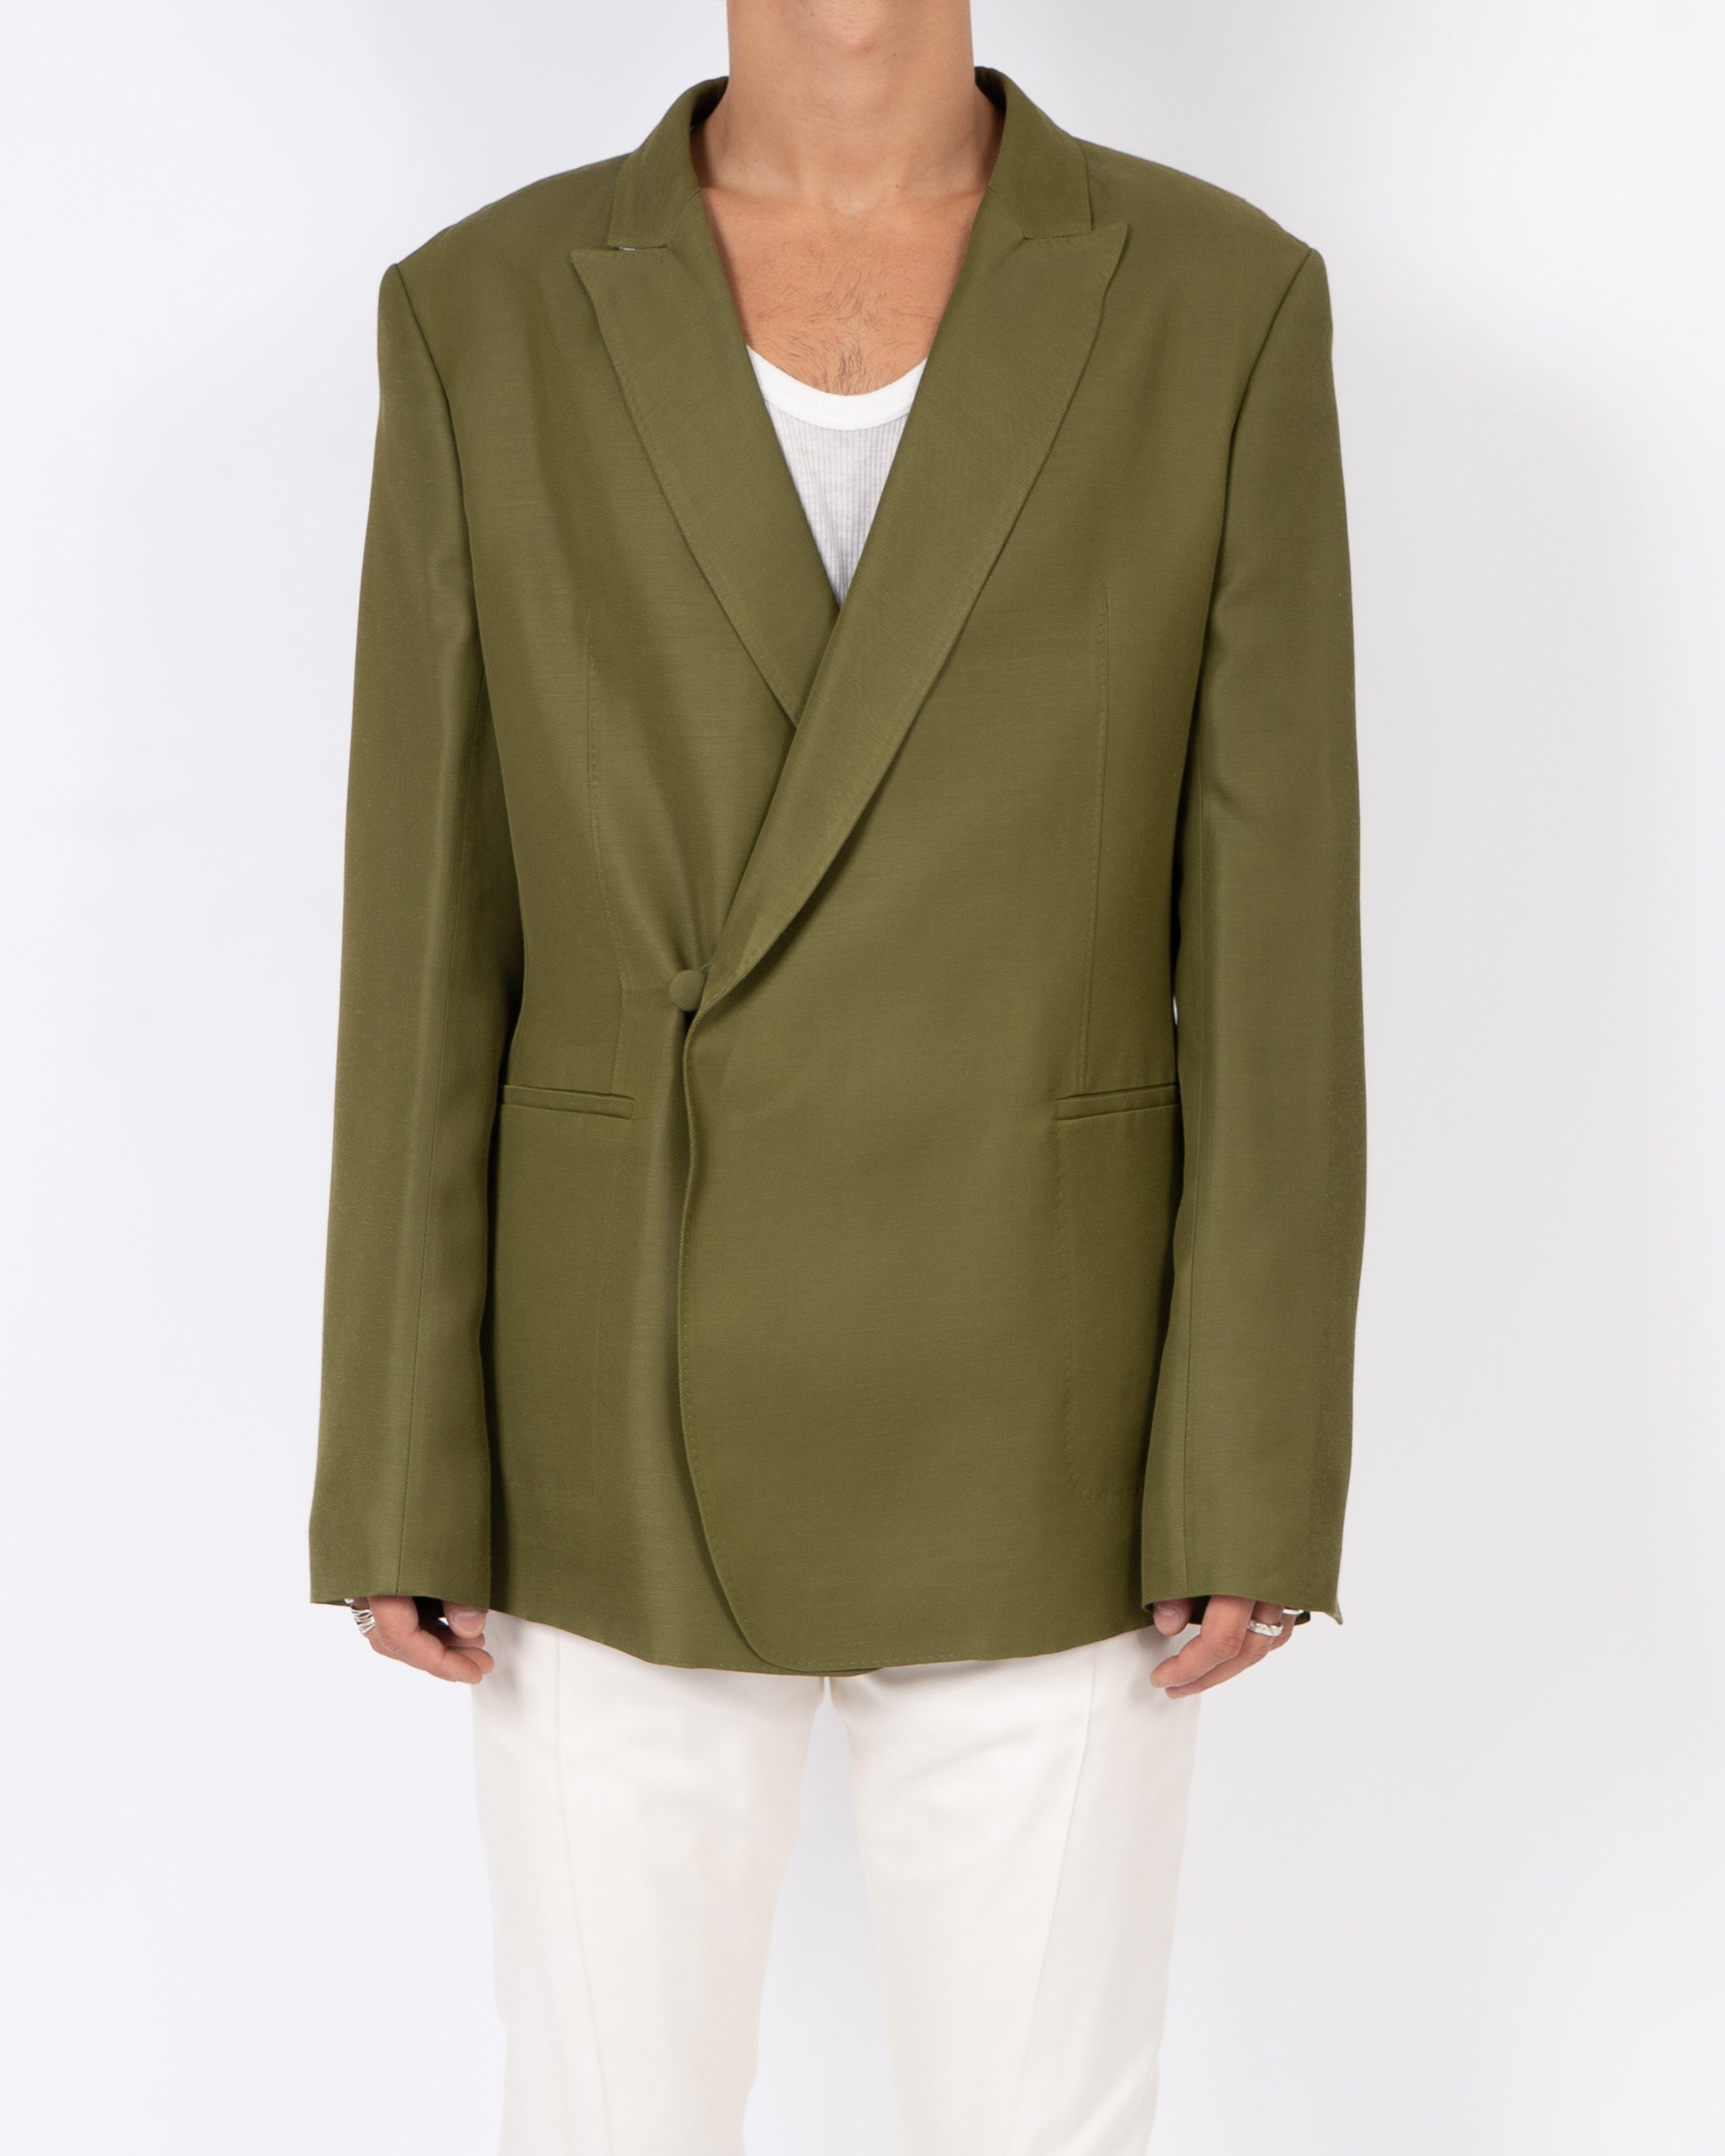 SS20 Double Breasted Green Blazer